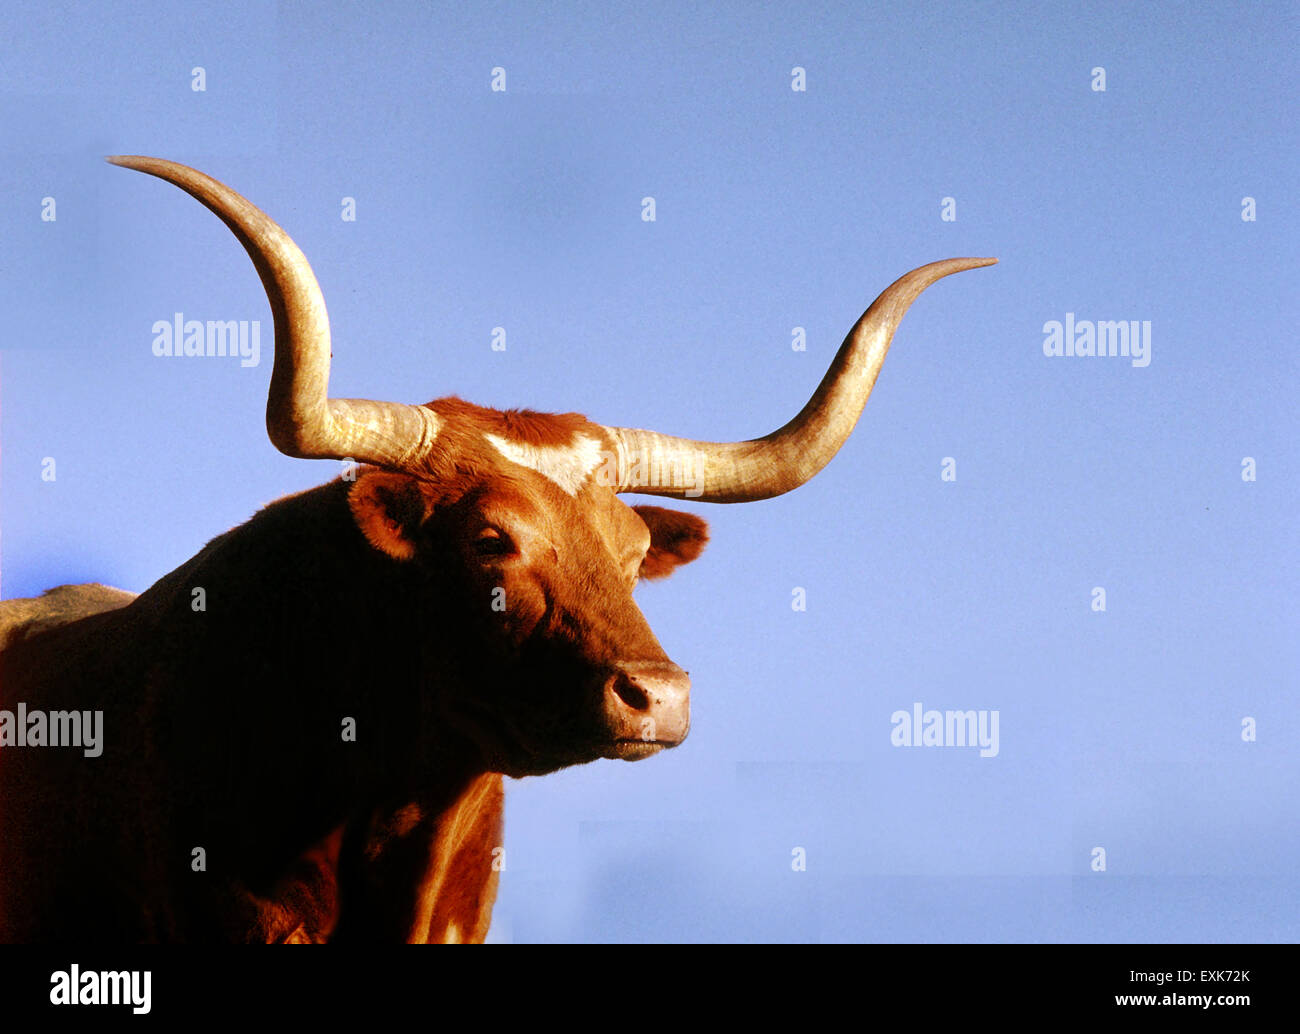 State animal for Texas is the Longhorn, mascot for the University of Texas and numerous high schools. Longhorns brought by Spanish could were hardy and could survive in dry Texas ranches before being herded north to the railroad in the 1850's. Stock Photo